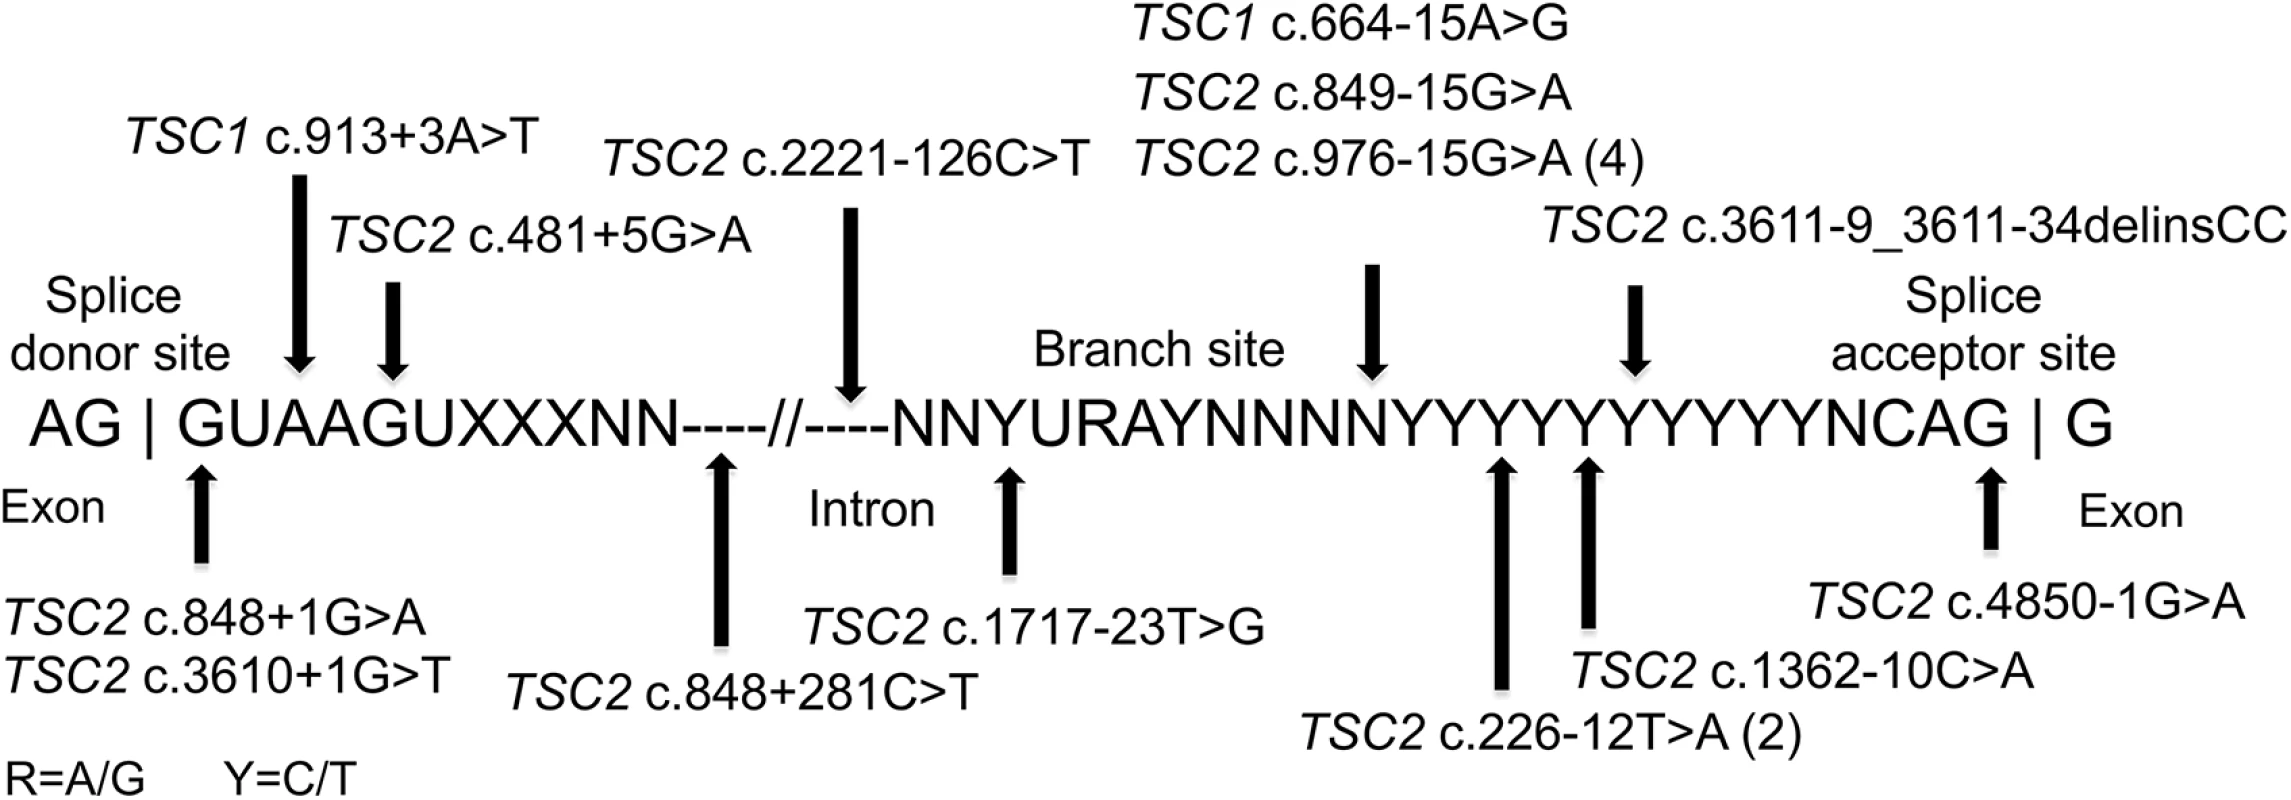 Intronic mutations in 18 TSC NMI subjects.